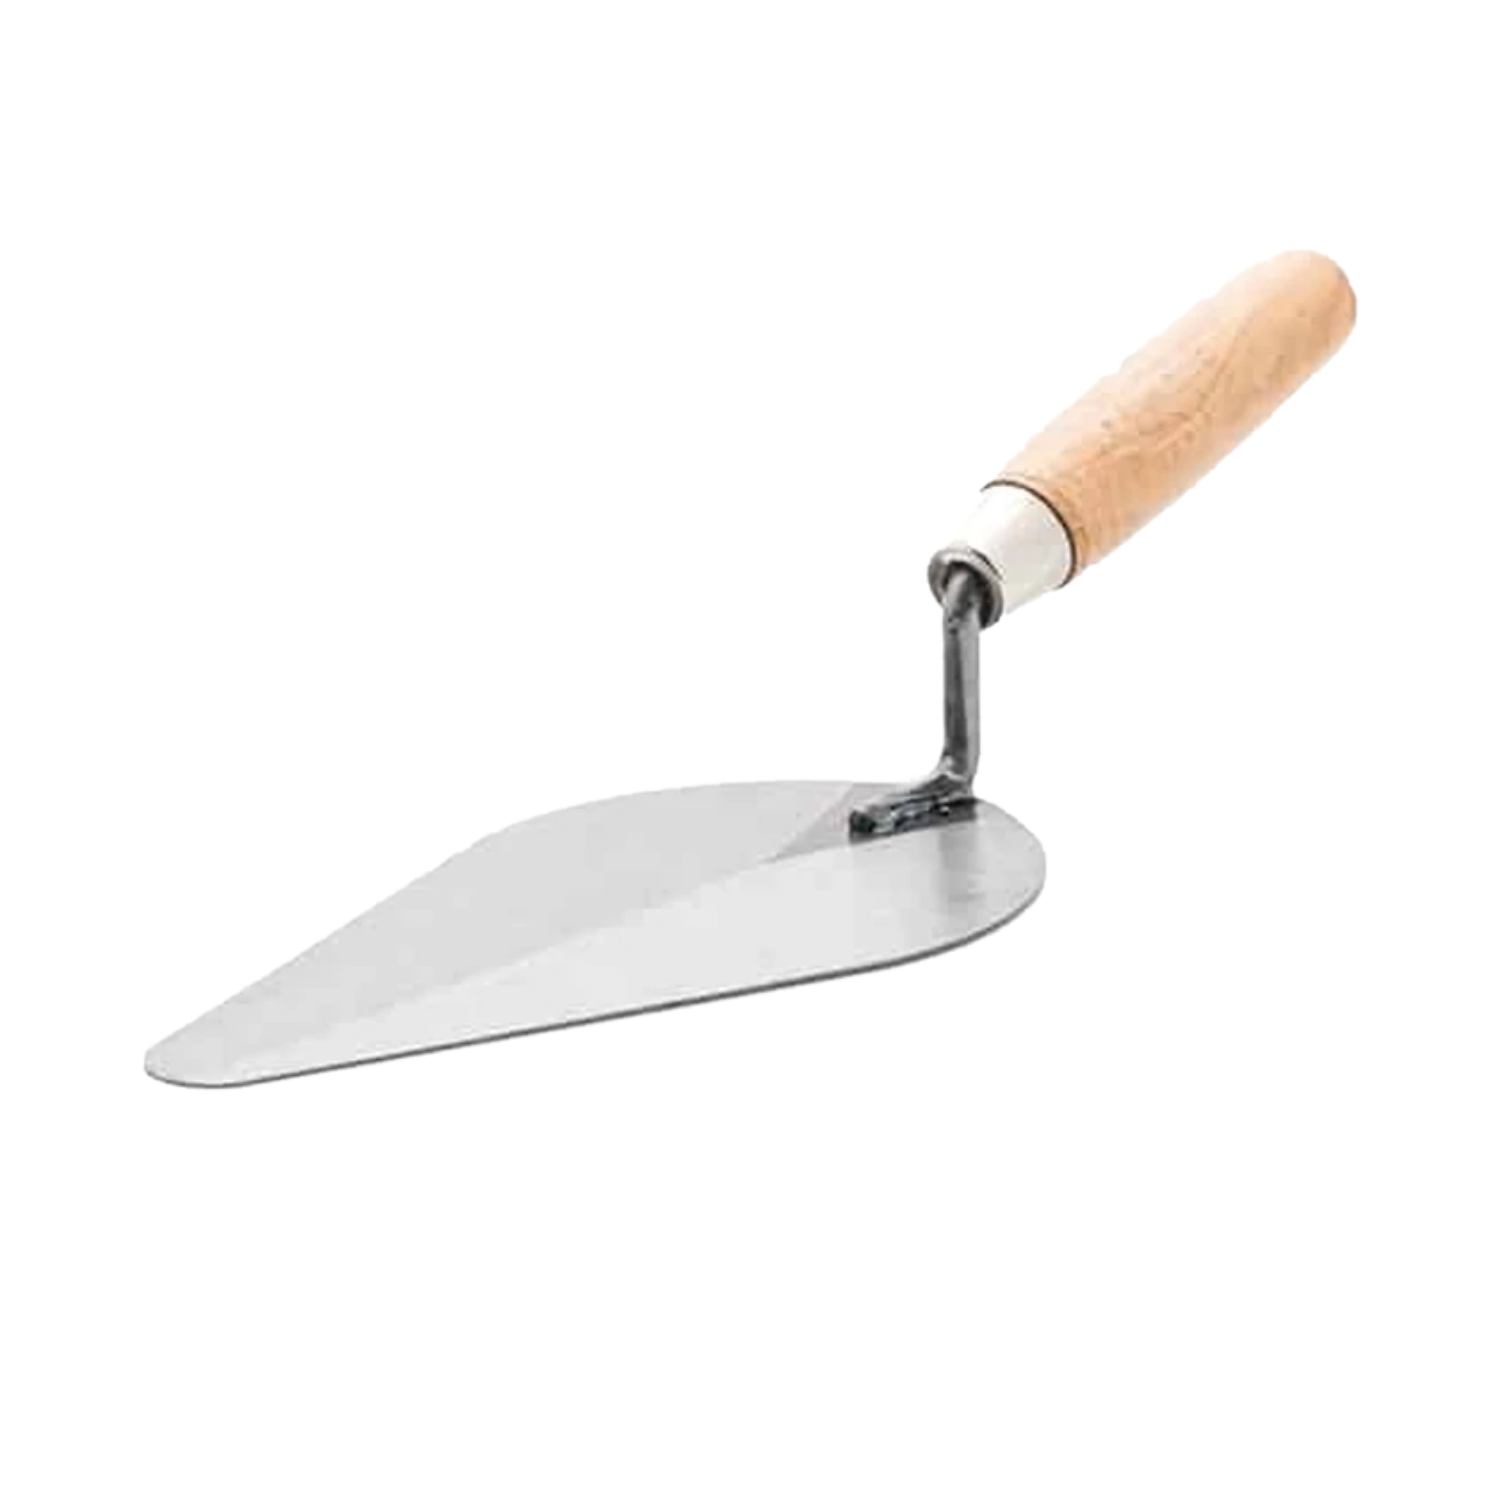 BRICKLAYING TROWEL WOODEN HANDLE ROUND SHAPE (12 INCH)